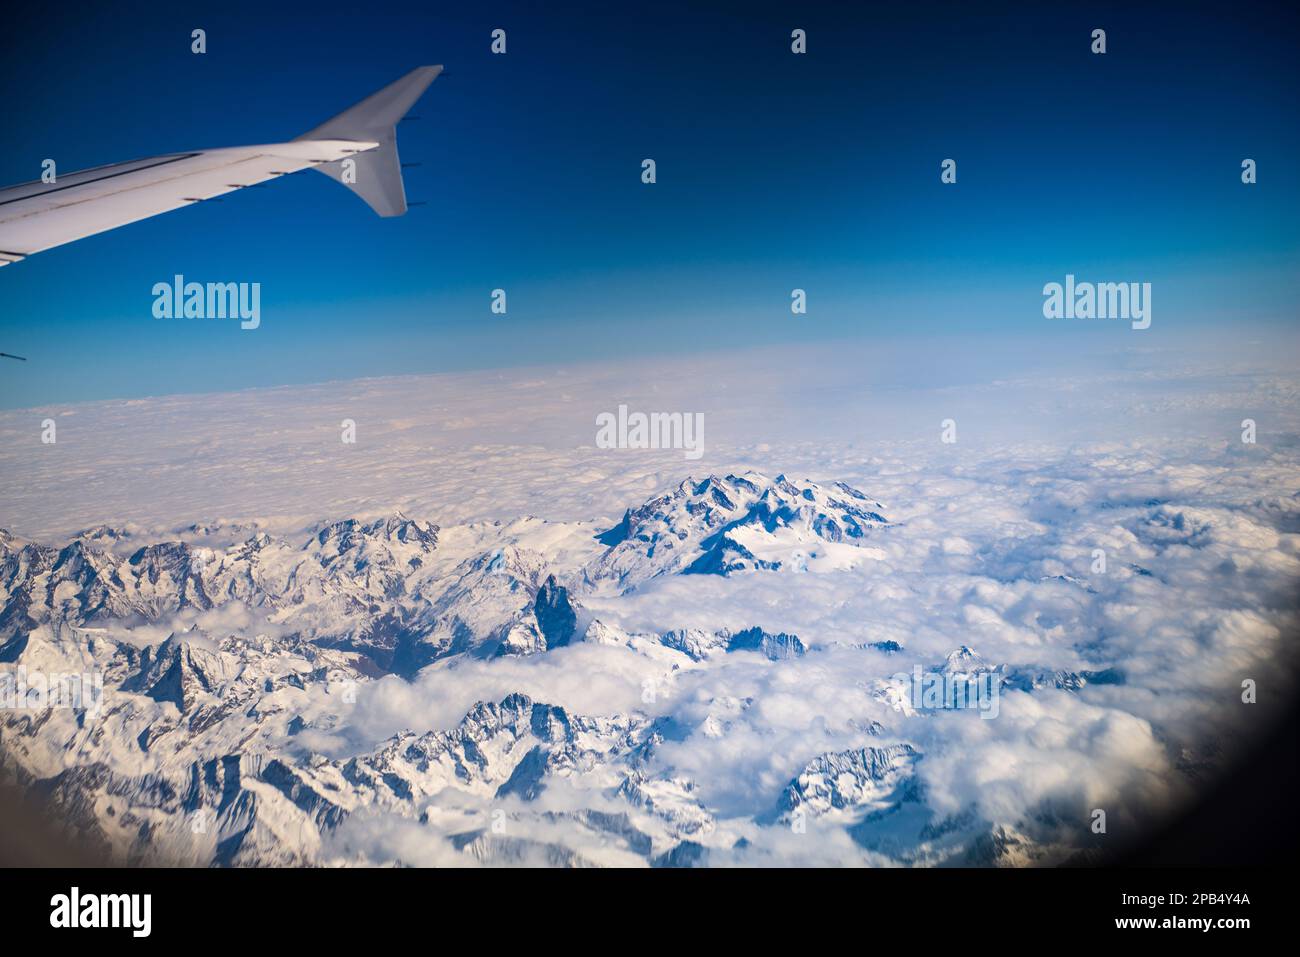 View of the swiss alps through an airplane window Stock Photo